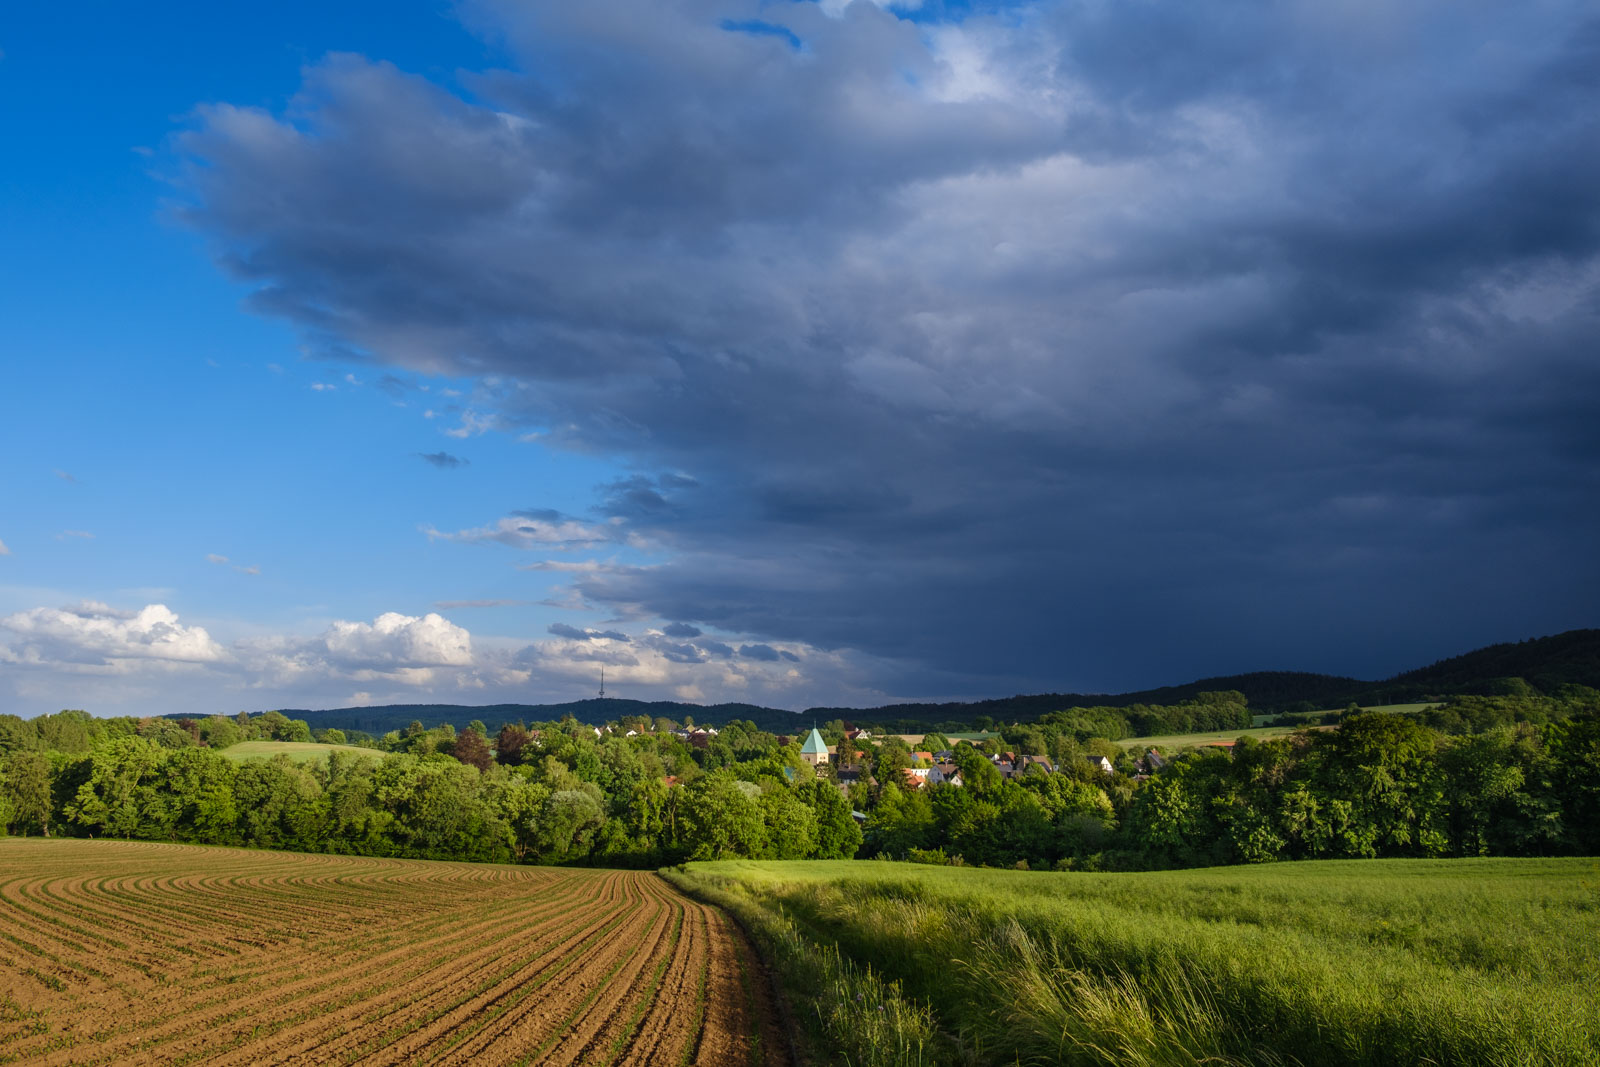 Rising thunderclouds over 'Krichdornberg' in May 2020 (Bielefeld, Germany).